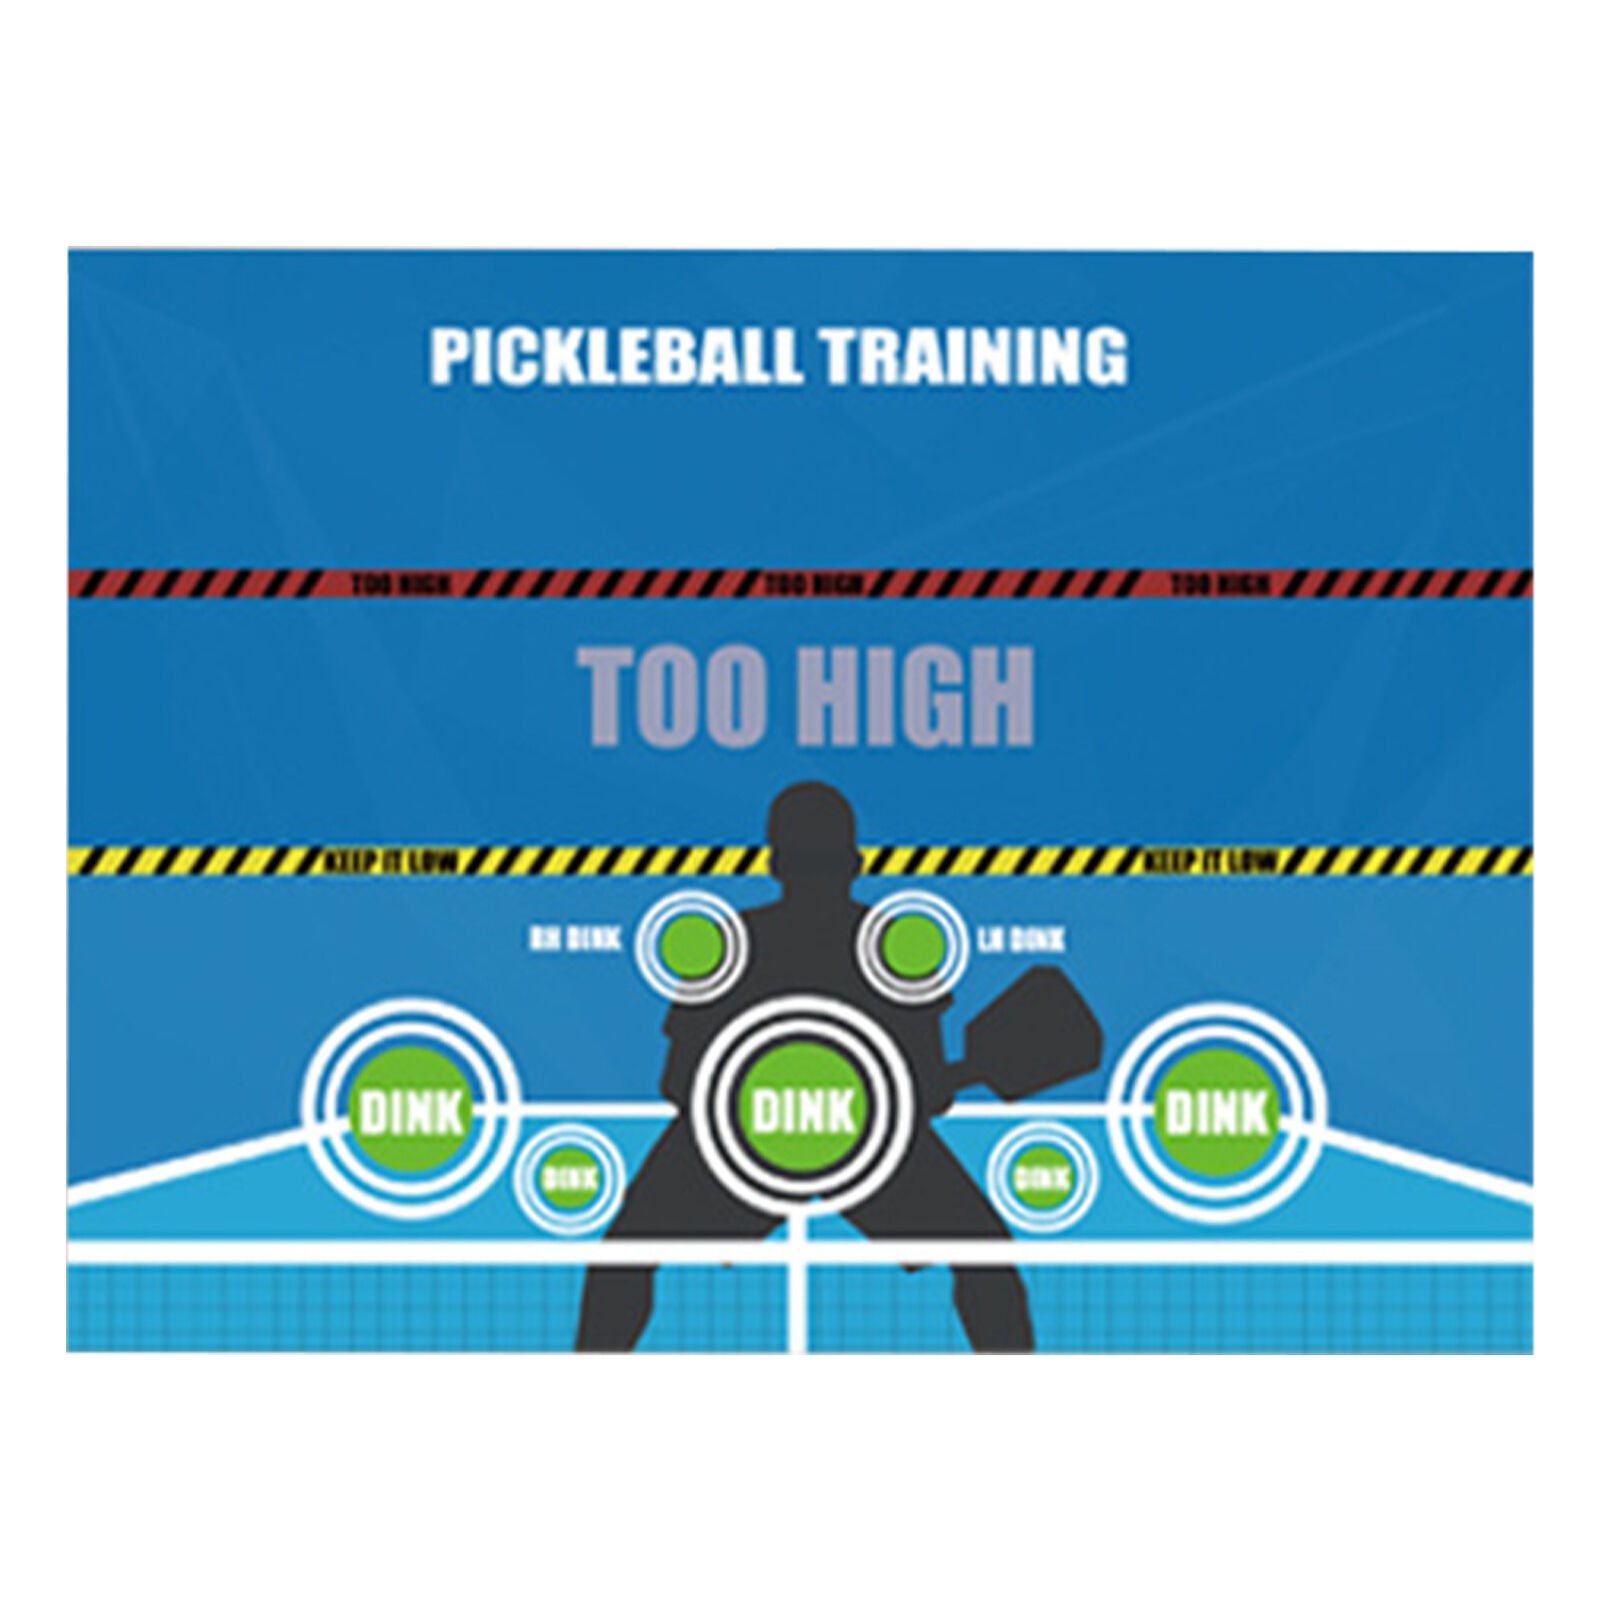 Pickleball Wall Dink Pad Practice Pad For Walls Training Improve Pickleball Game